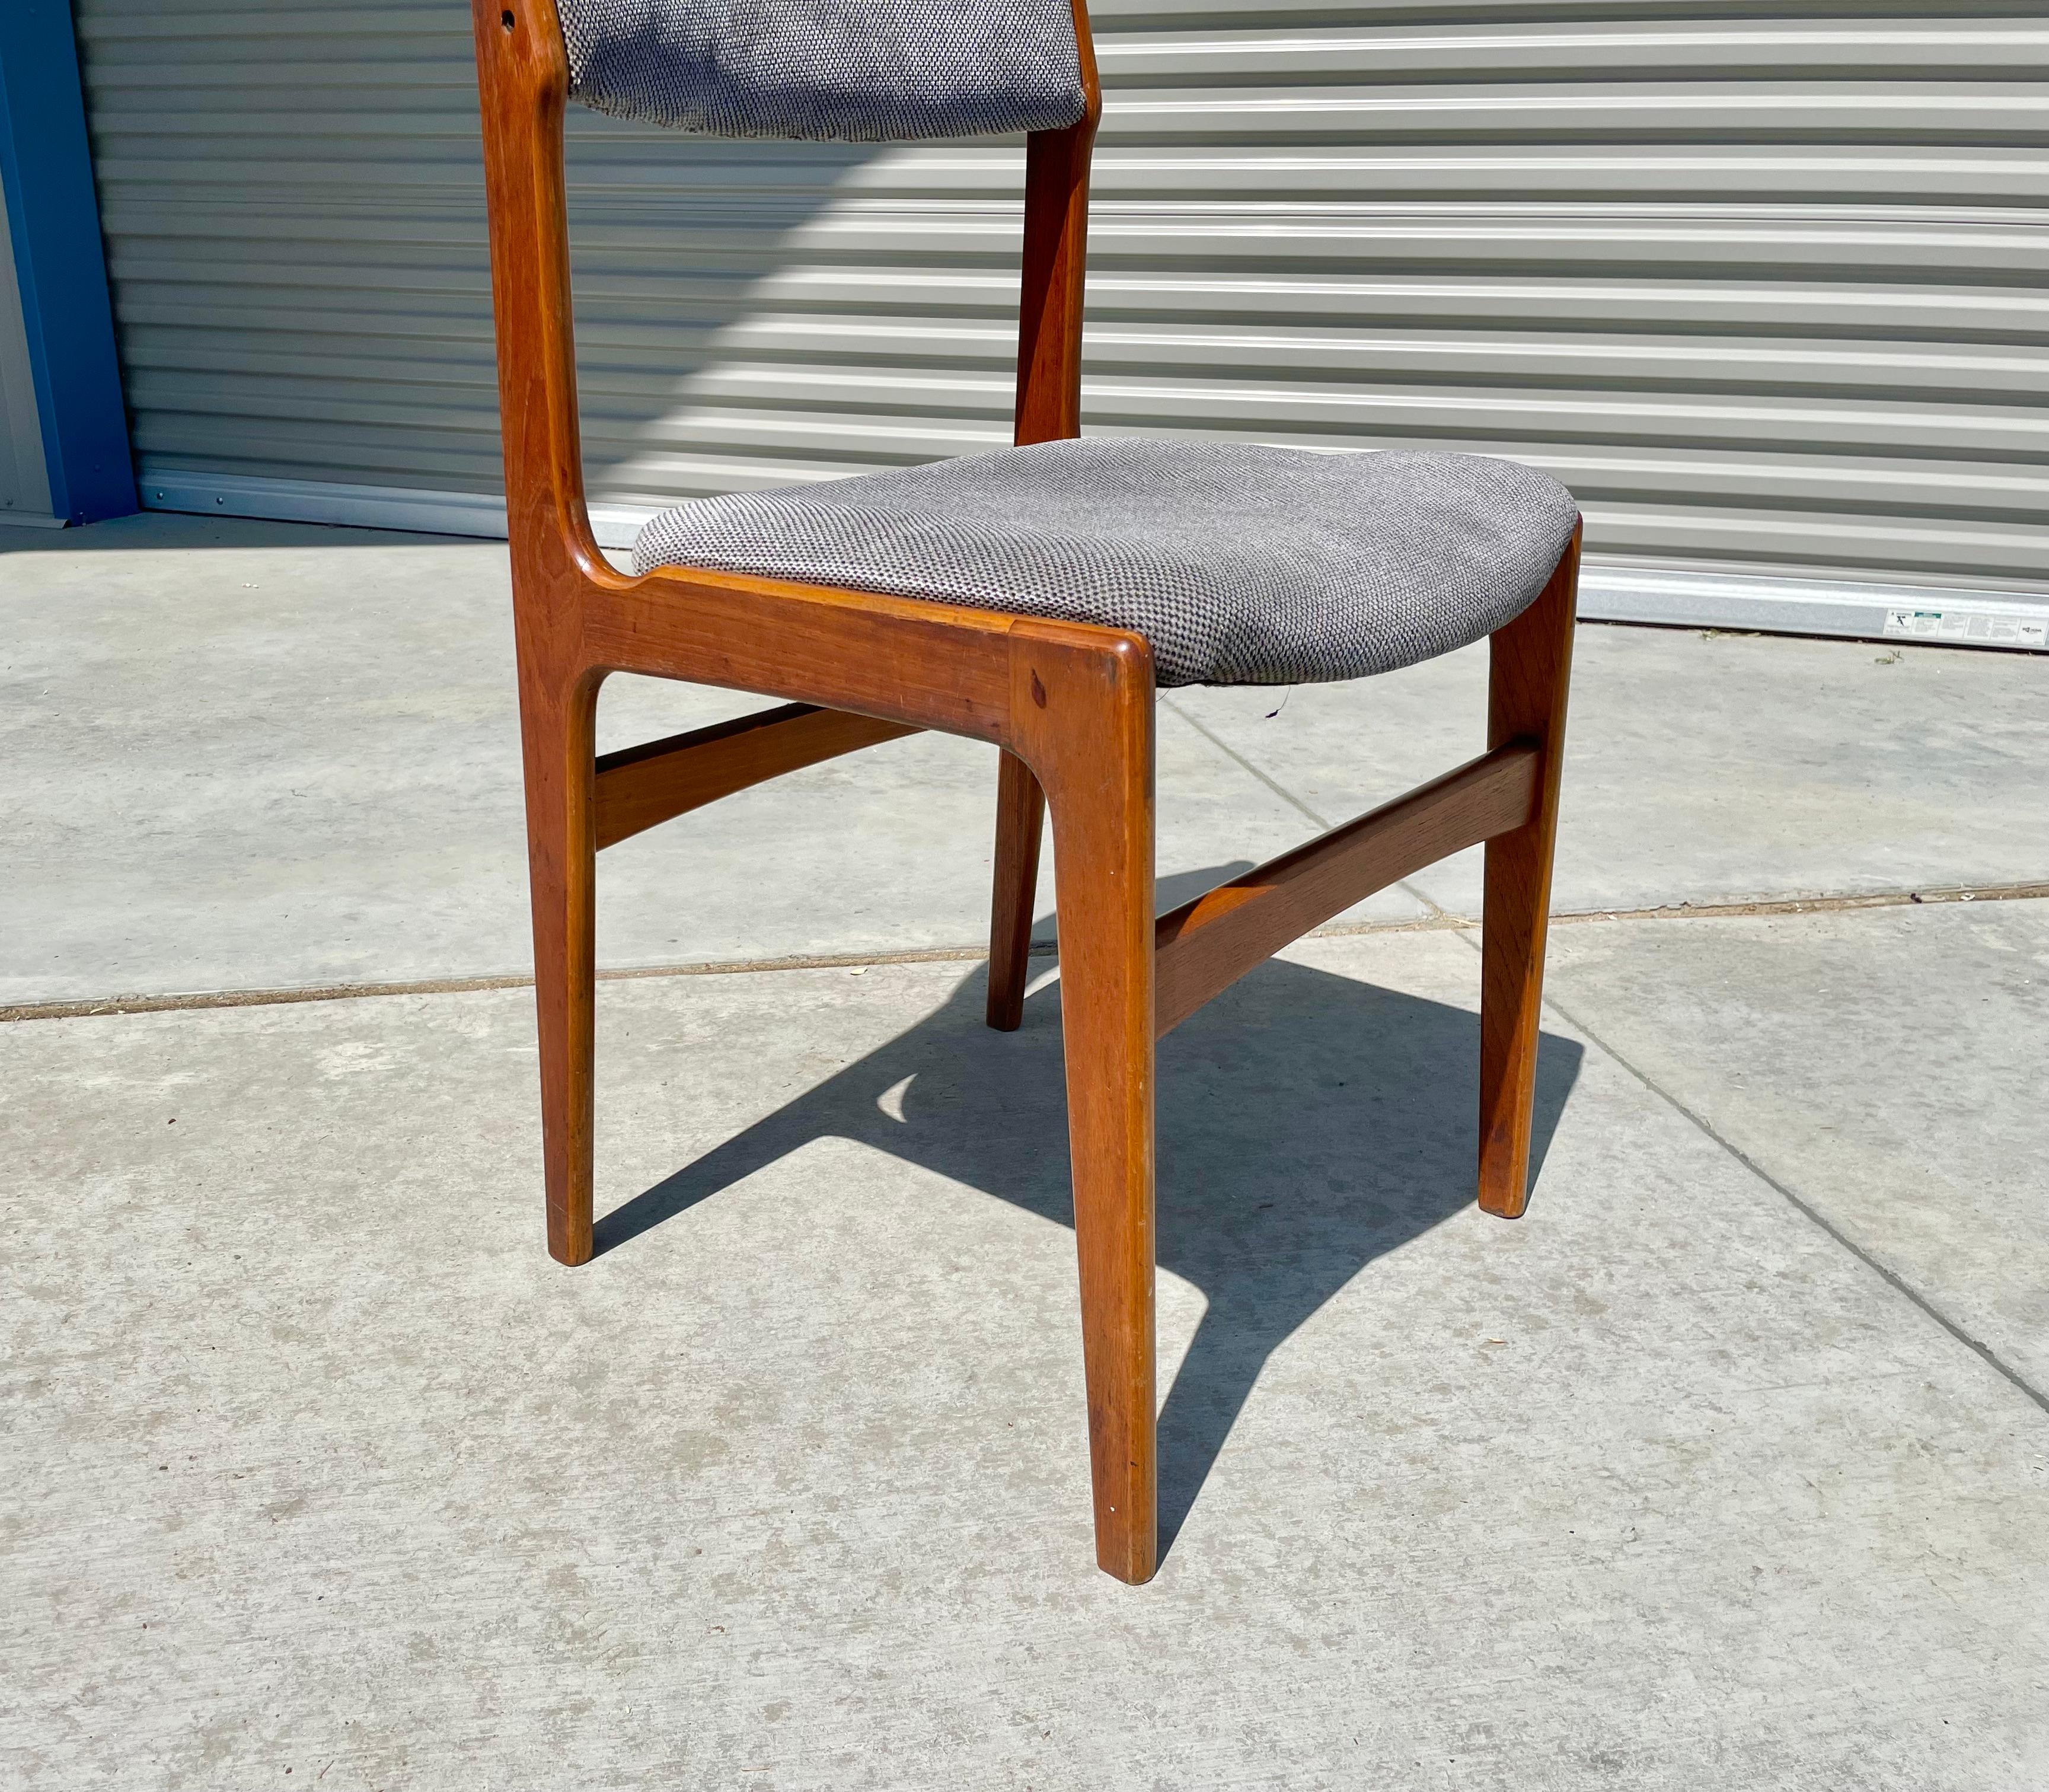 1960s Danish Modern Teak Dining Chairs - Set of 6 For Sale 9